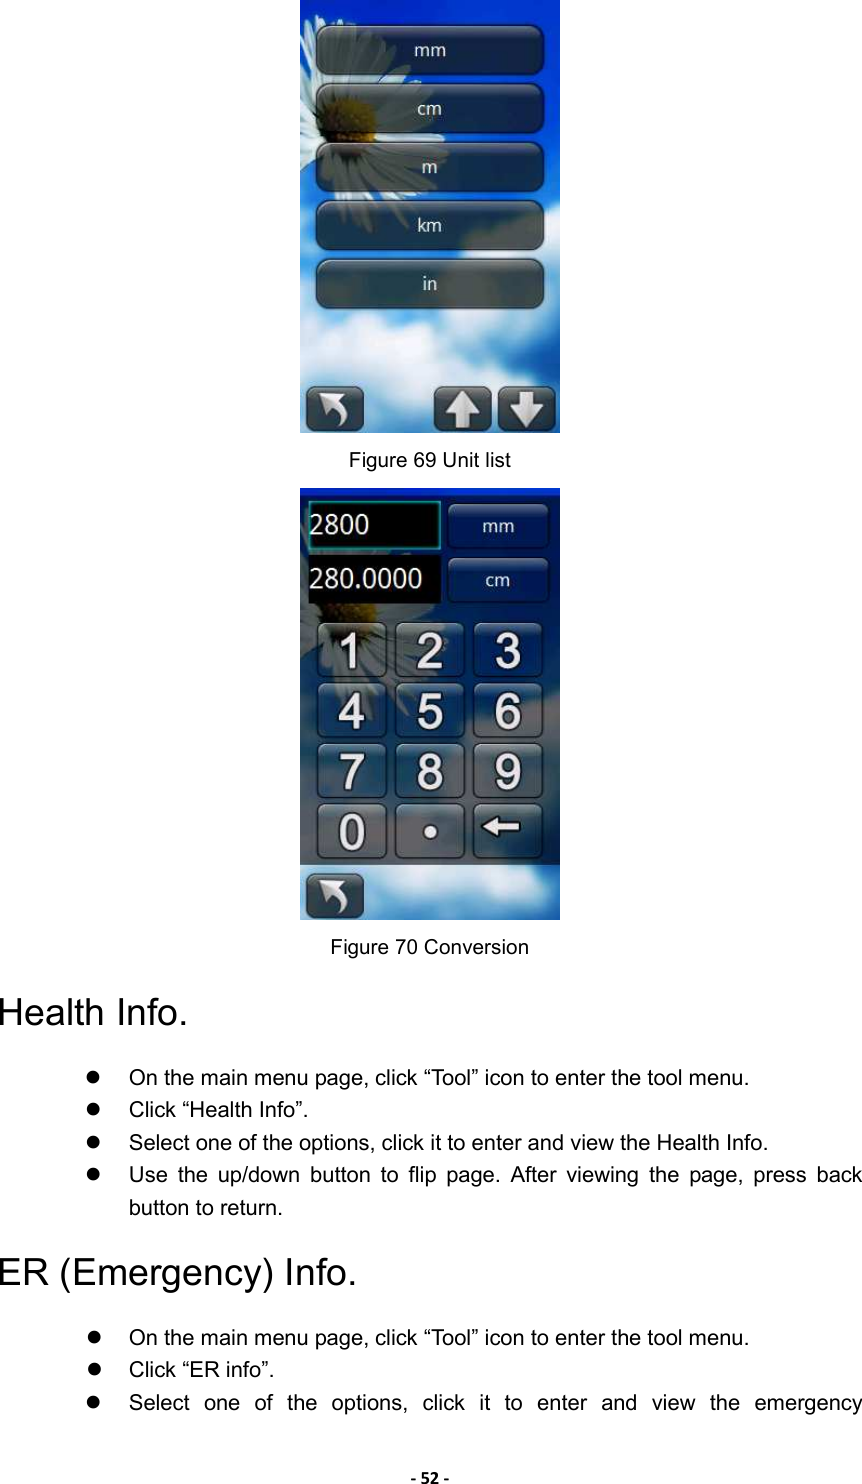 - 52 -  Figure 69 Unit list  Figure 70 Conversion Health Info.   On the main menu page, click “Tool” icon to enter the tool menu.   Click “Health Info”.   Select one of the options, click it to enter and view the Health Info.   Use  the  up/down  button  to  flip  page.  After  viewing  the  page,  press  back button to return. ER (Emergency) Info.     On the main menu page, click “Tool” icon to enter the tool menu.   Click “ER info”.   Select  one  of  the  options,  click  it  to  enter  and  view  the  emergency 